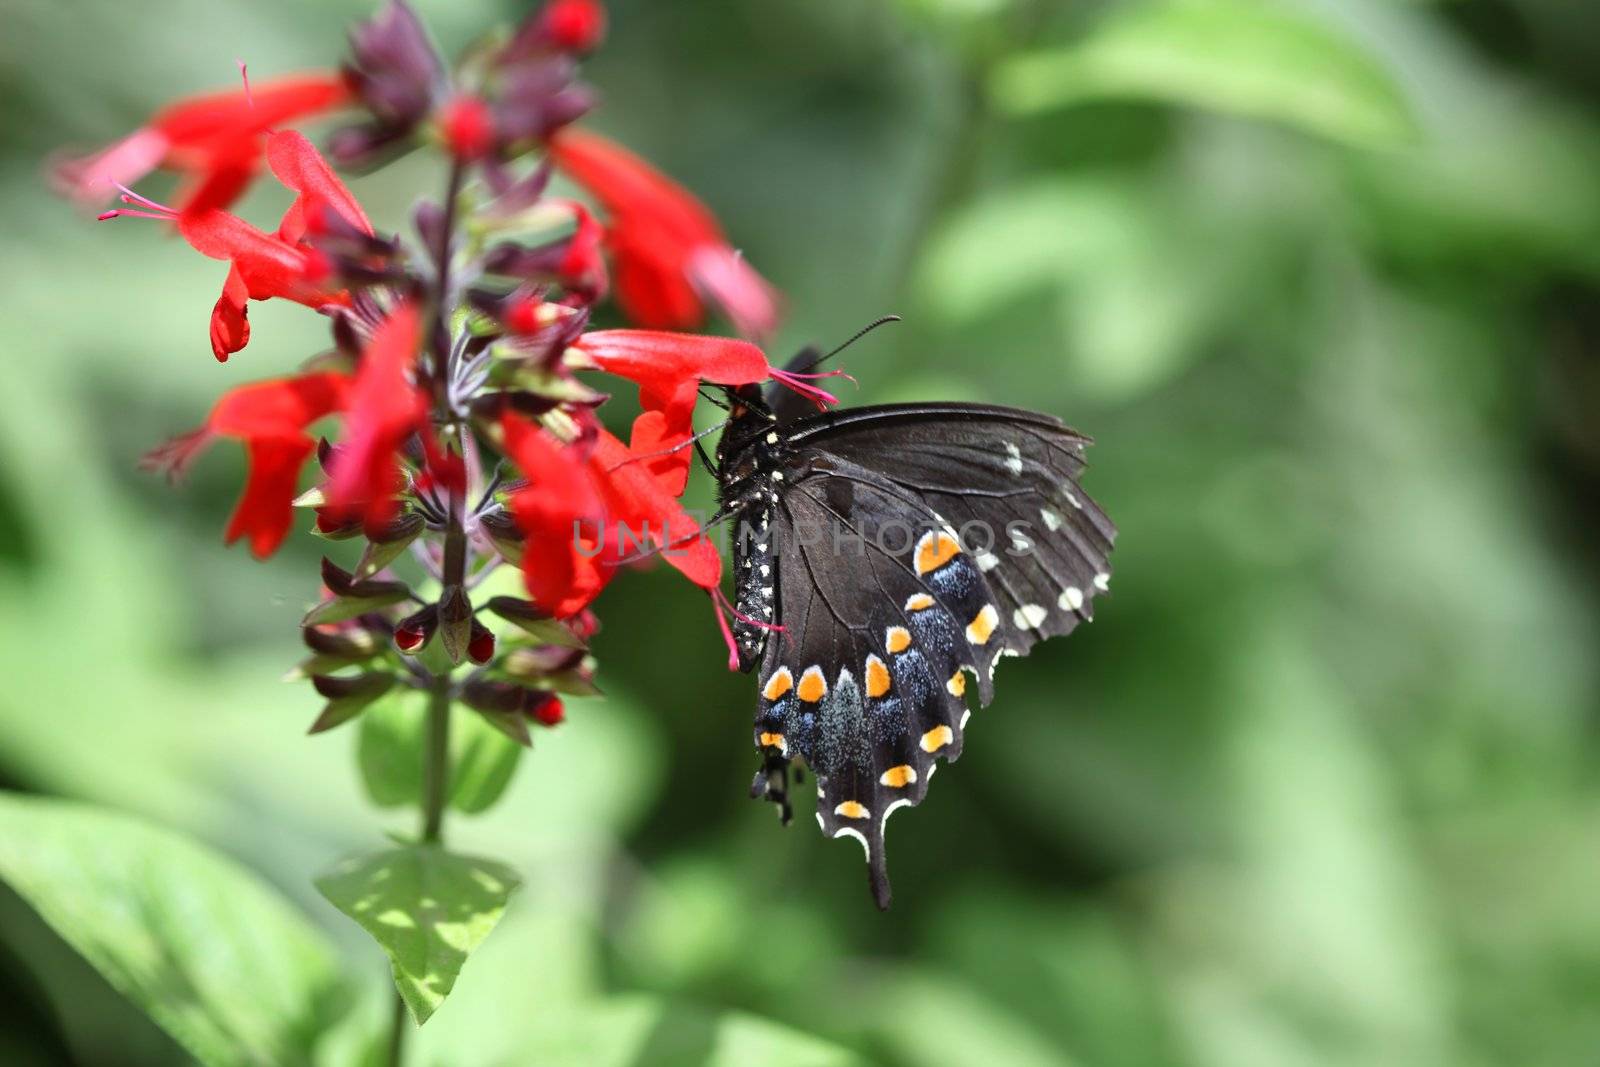 Black swallowtail butterly feeding on red salvia in the butterfly pavilion of the Phoenix botanical gardens